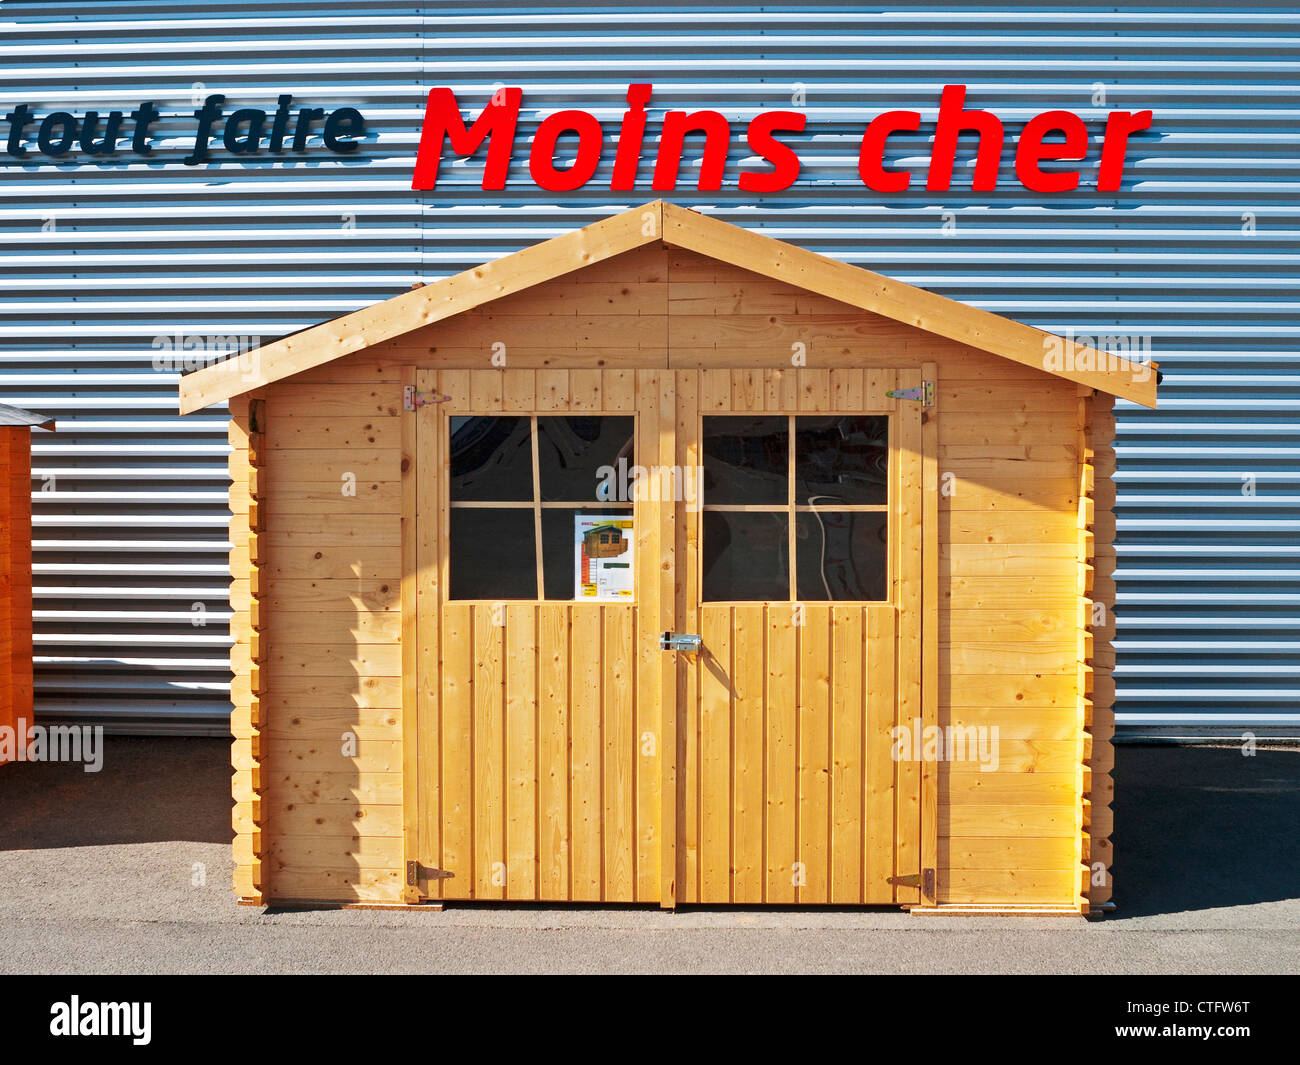 Bricomarché D-I-Y store garden sheds display, France. Stock Photo